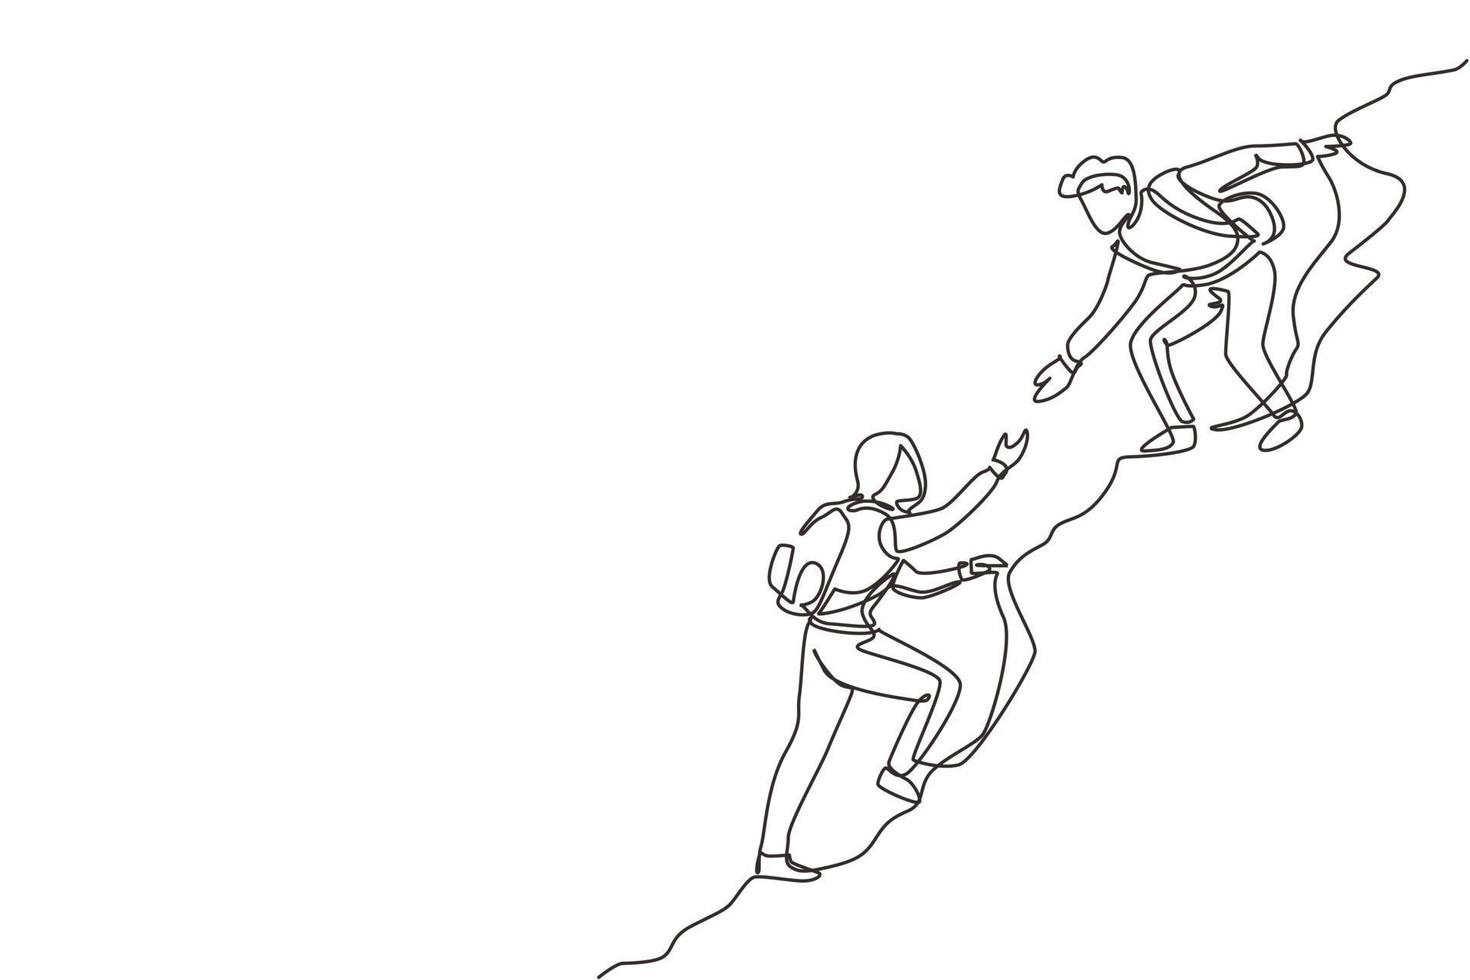 Continuous one line drawing man woman success on peak of mountain, Teamwork couple hiking, trust assistance in mountains, Team of climbers helping hand on mountain top. Single line draw design vector